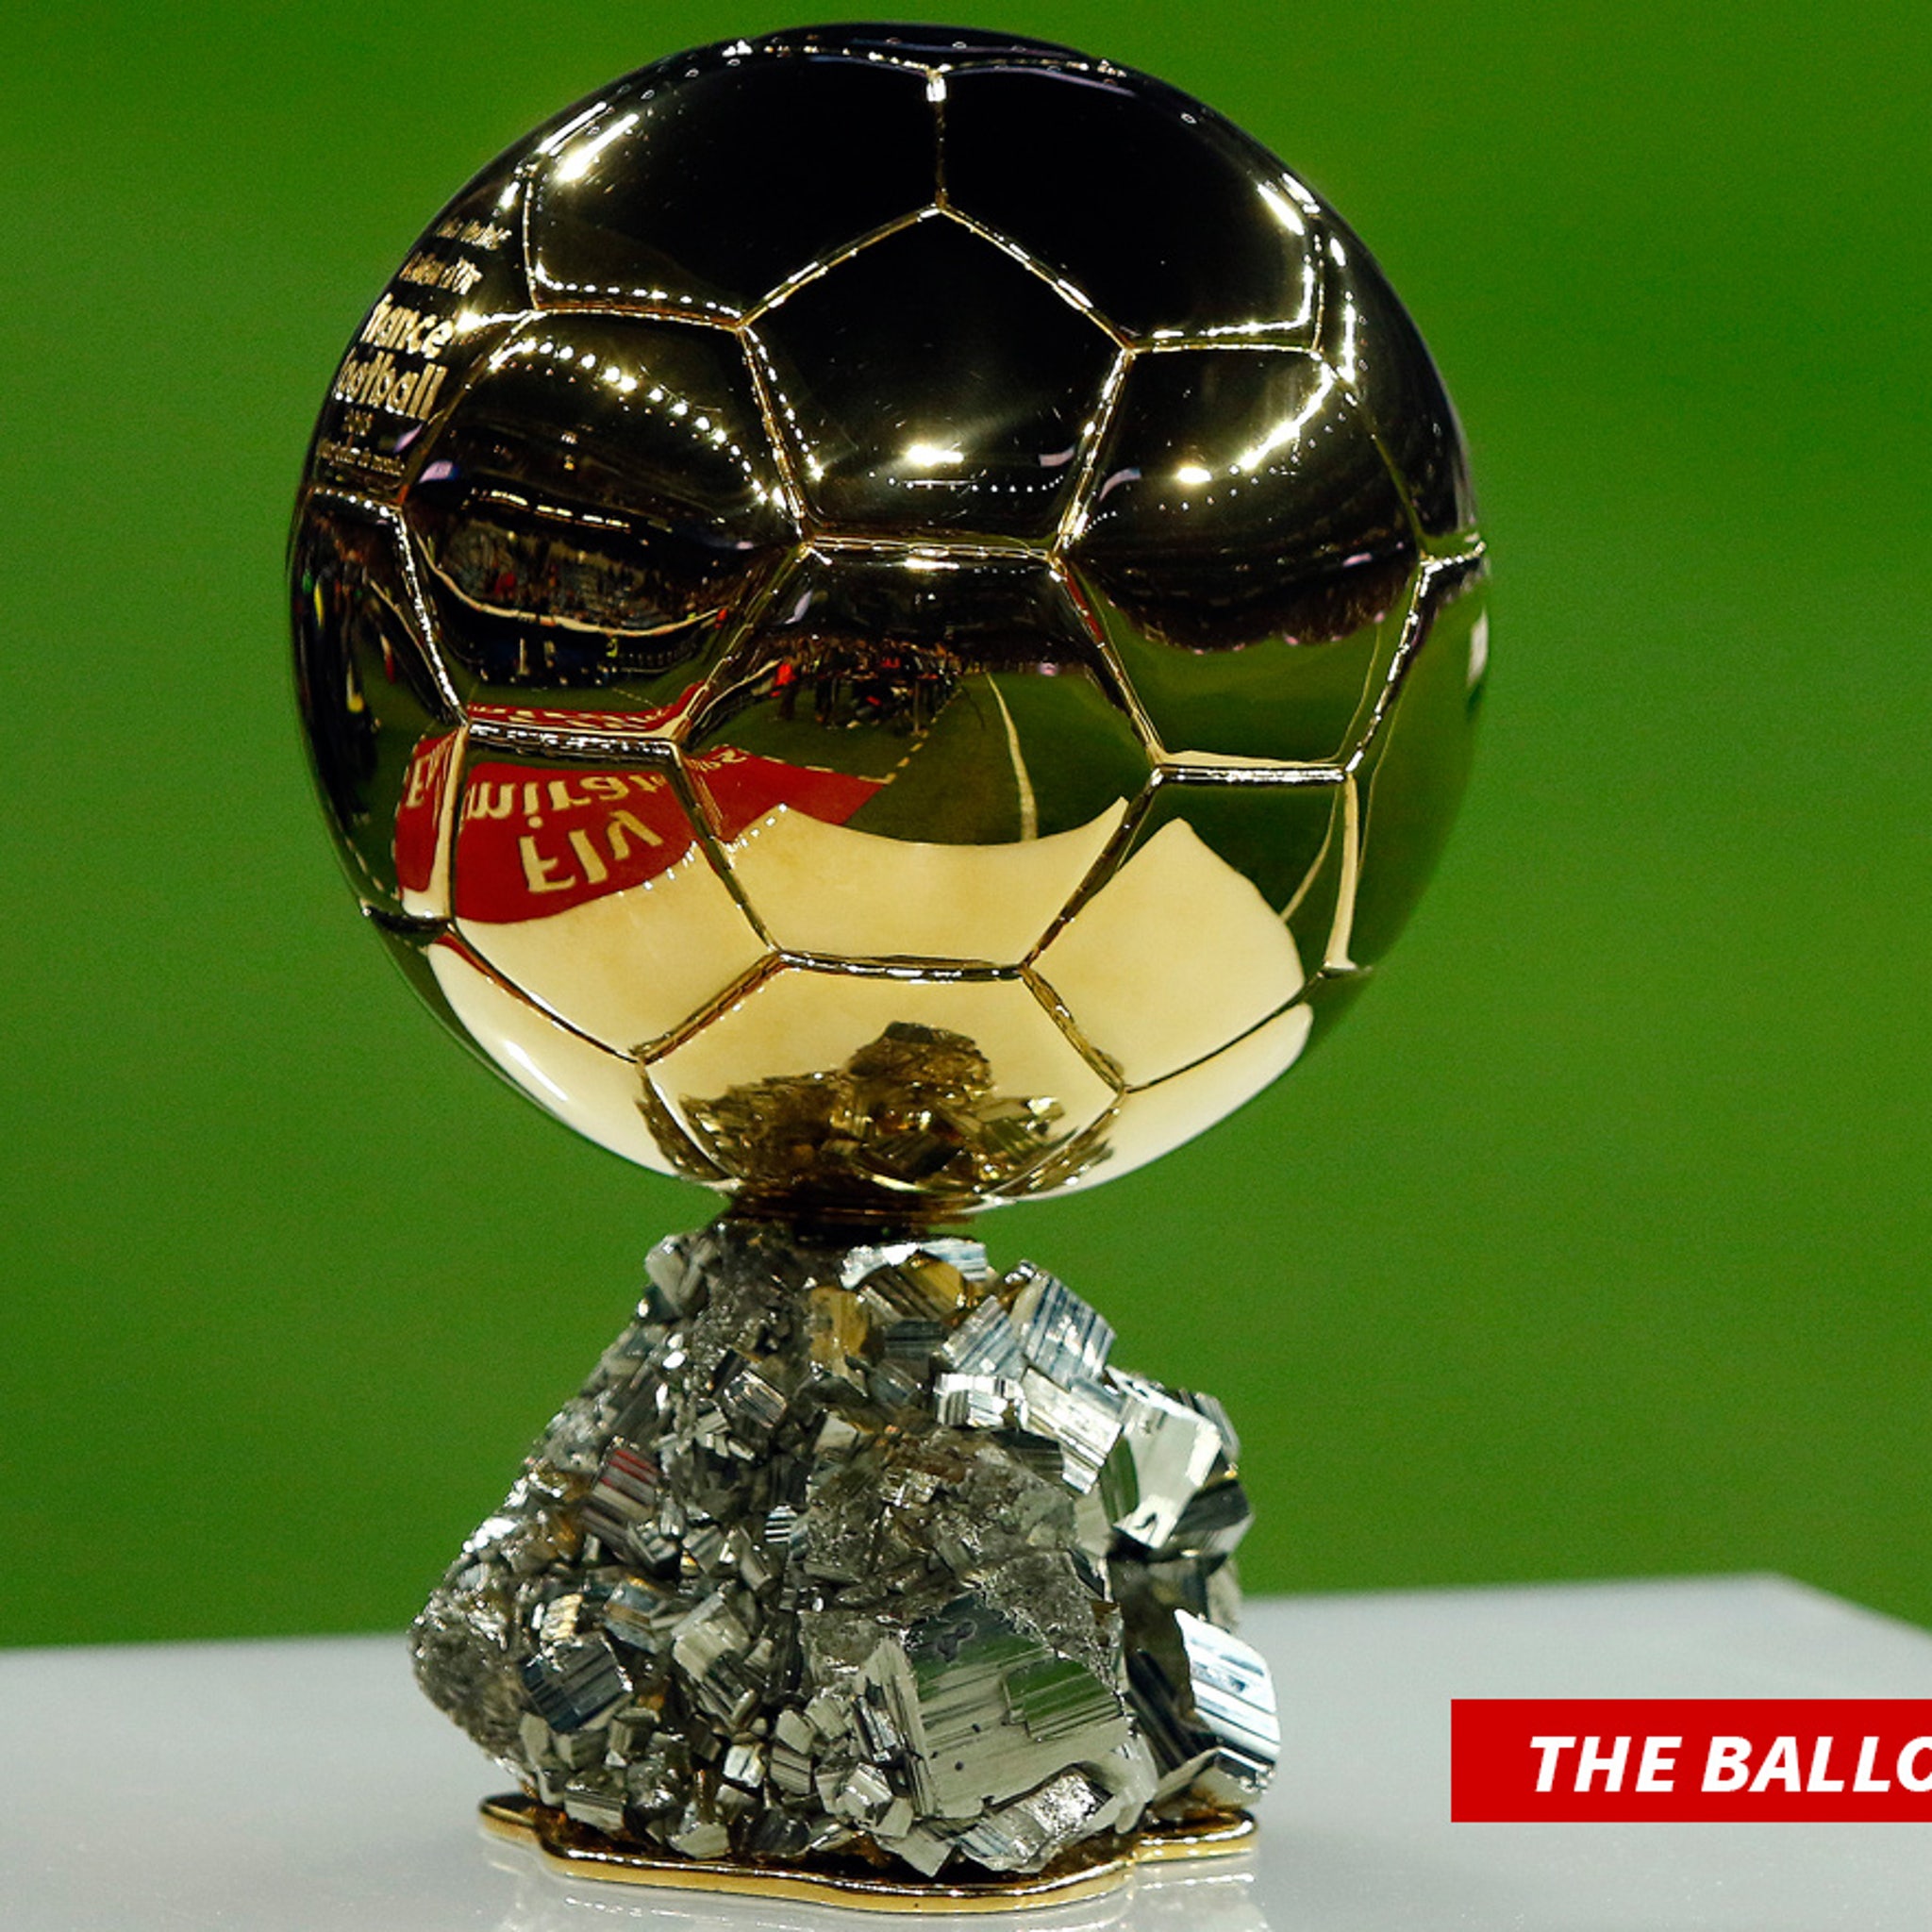 Football's coveted Ballon d'Or cancelled this year amid Covid-19